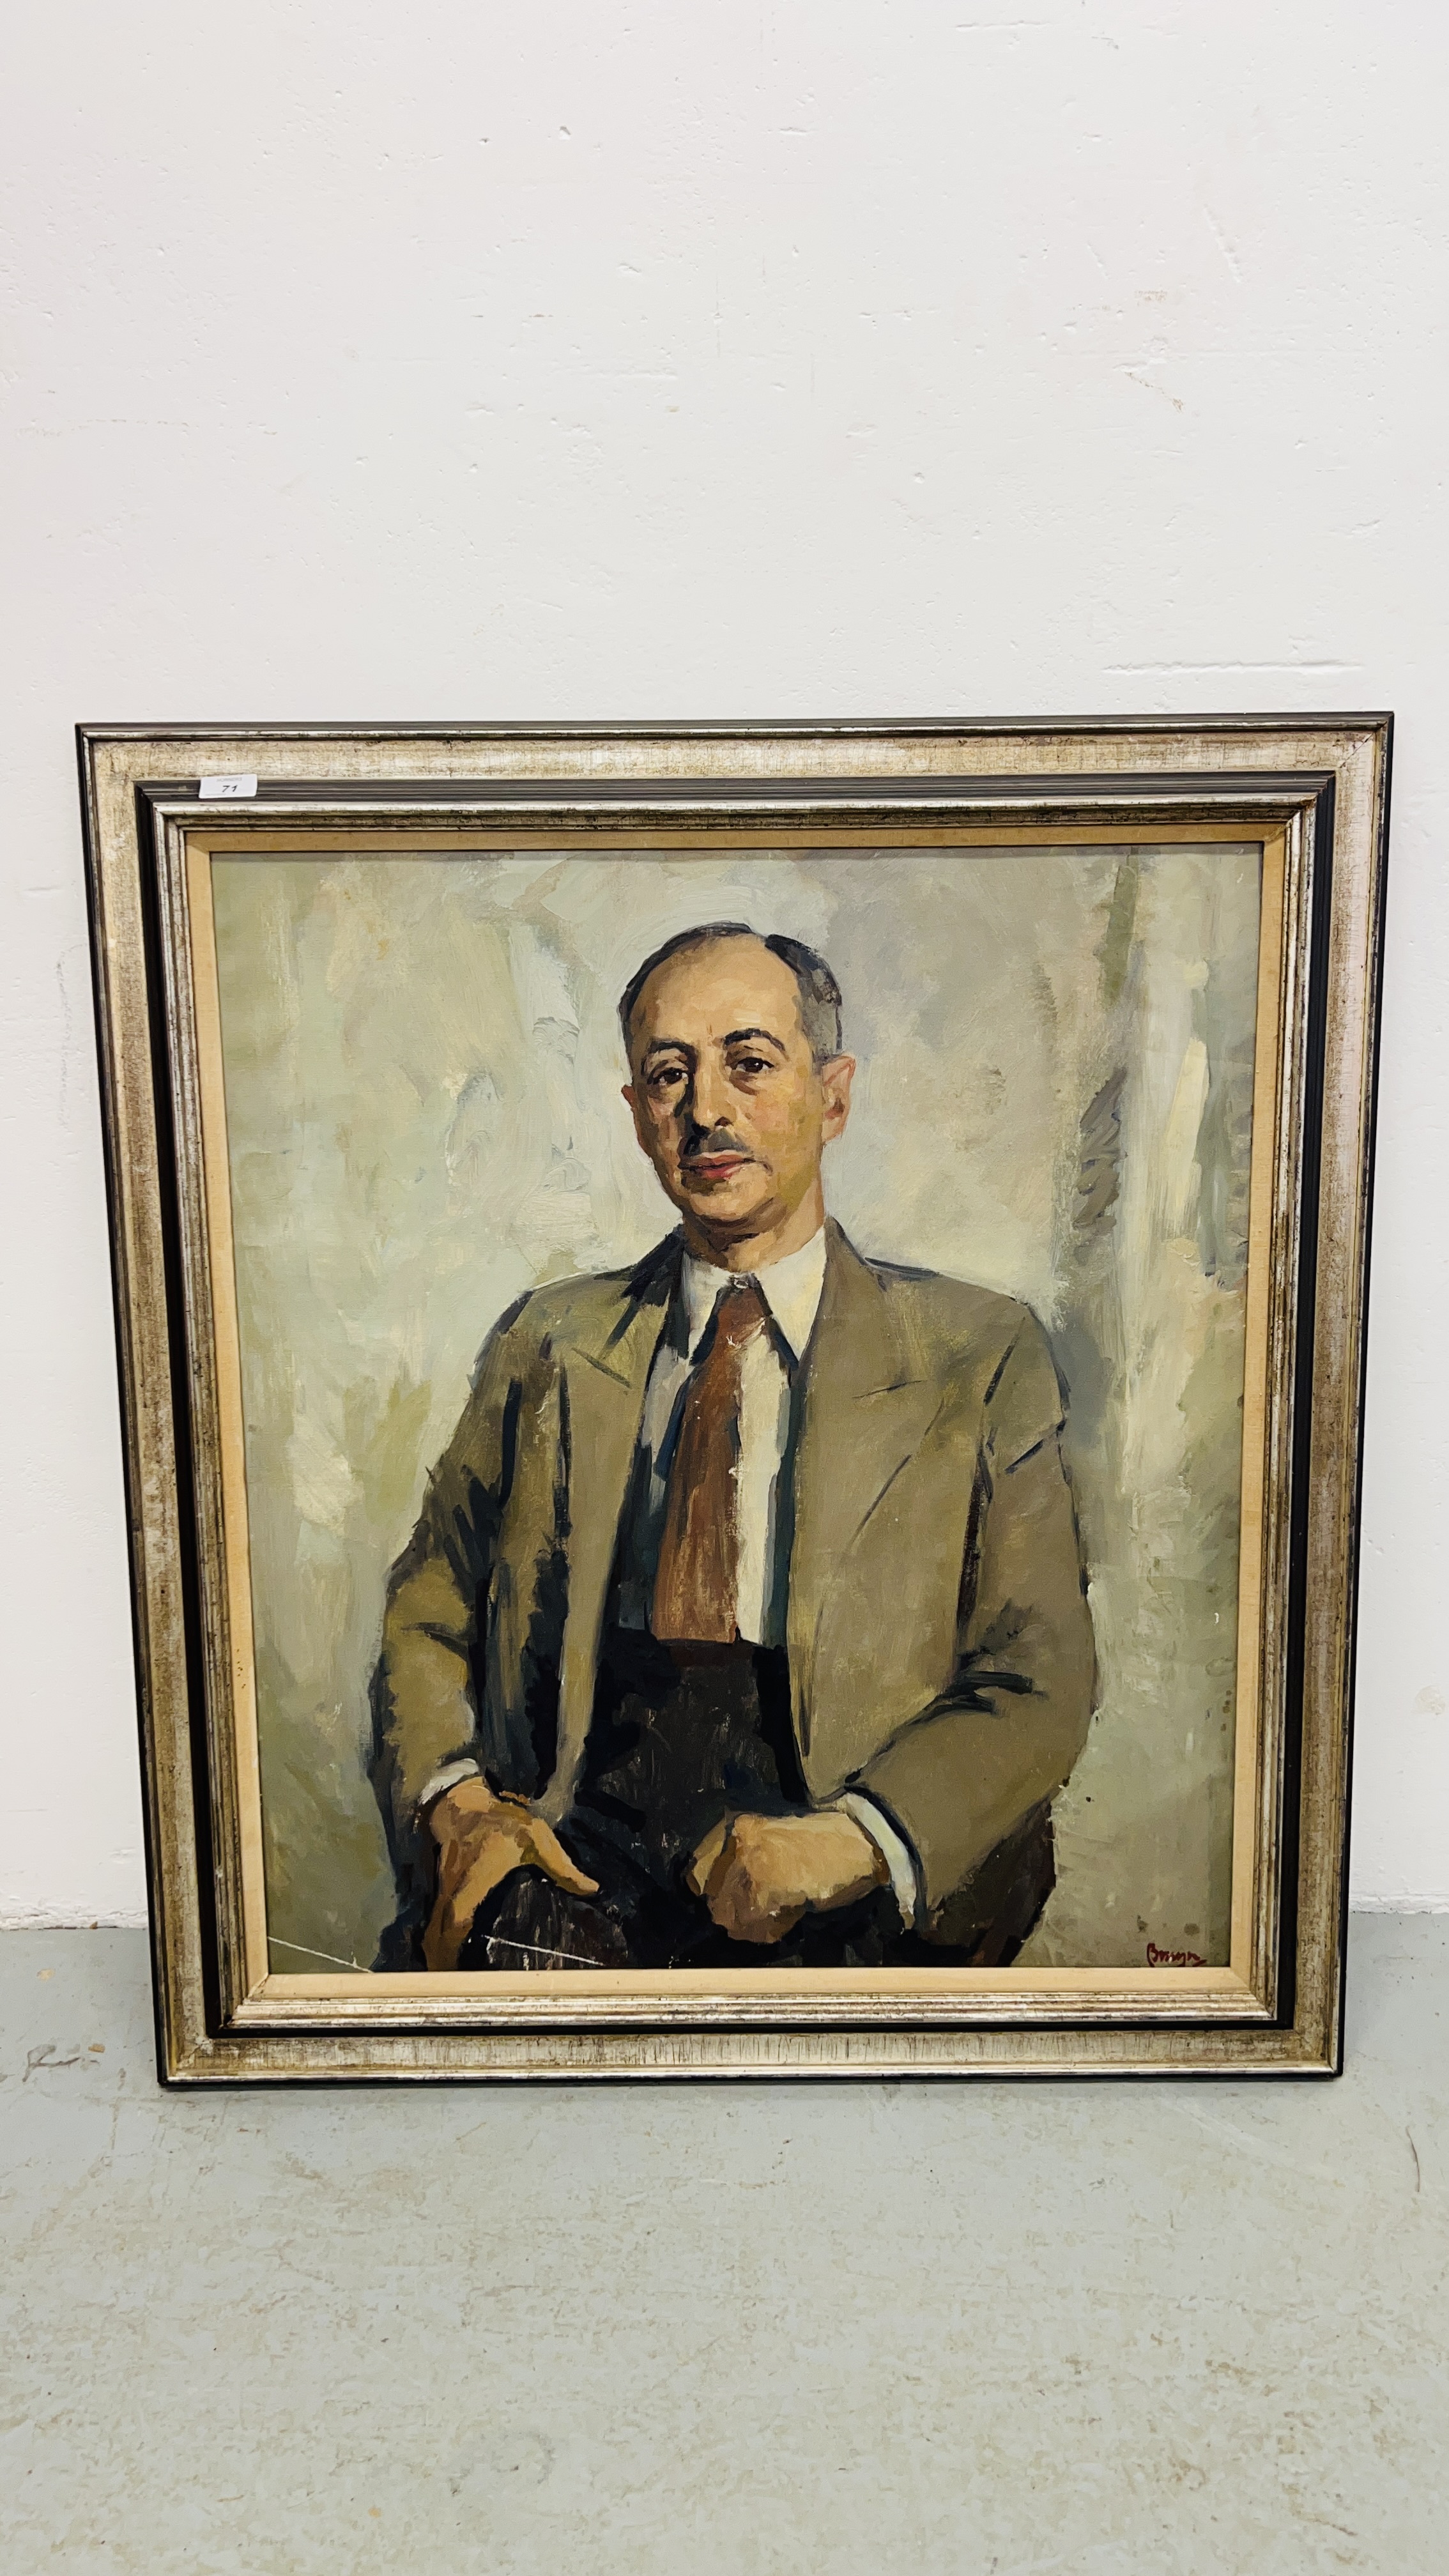 OIL ON CANVAS - PORTRAIT OF GENTLEMAN BEARING INDISTINCT SIGNATURE POSSIBLY JACOB BRUYN 84 X 73CM.